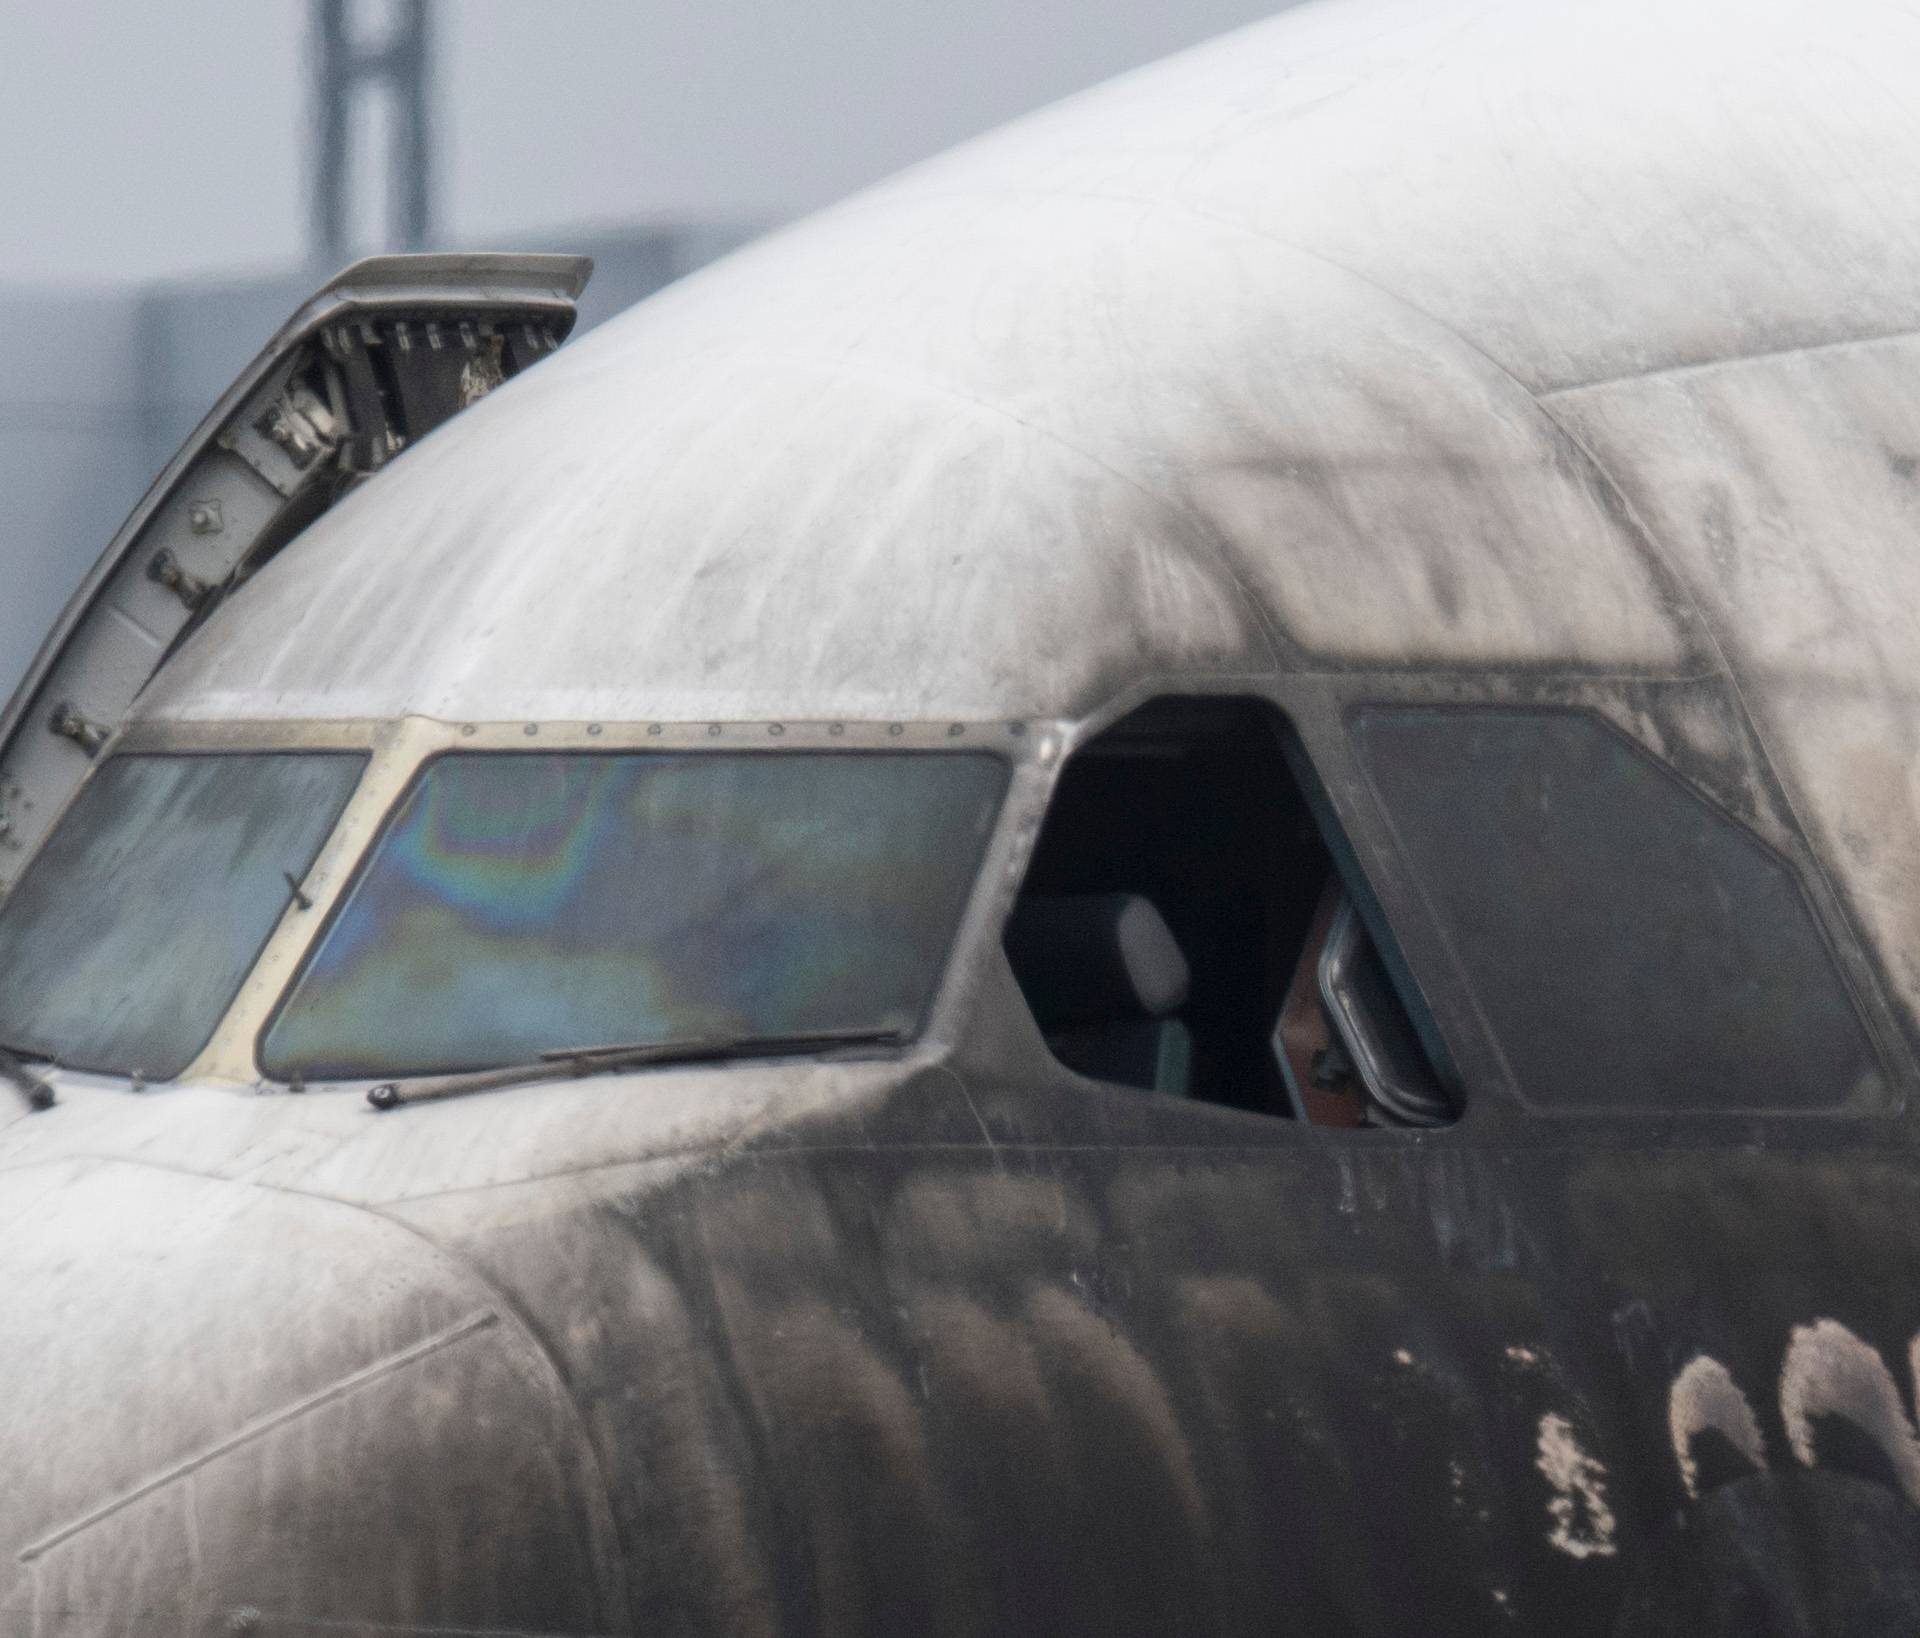 Airplane damaged by fire